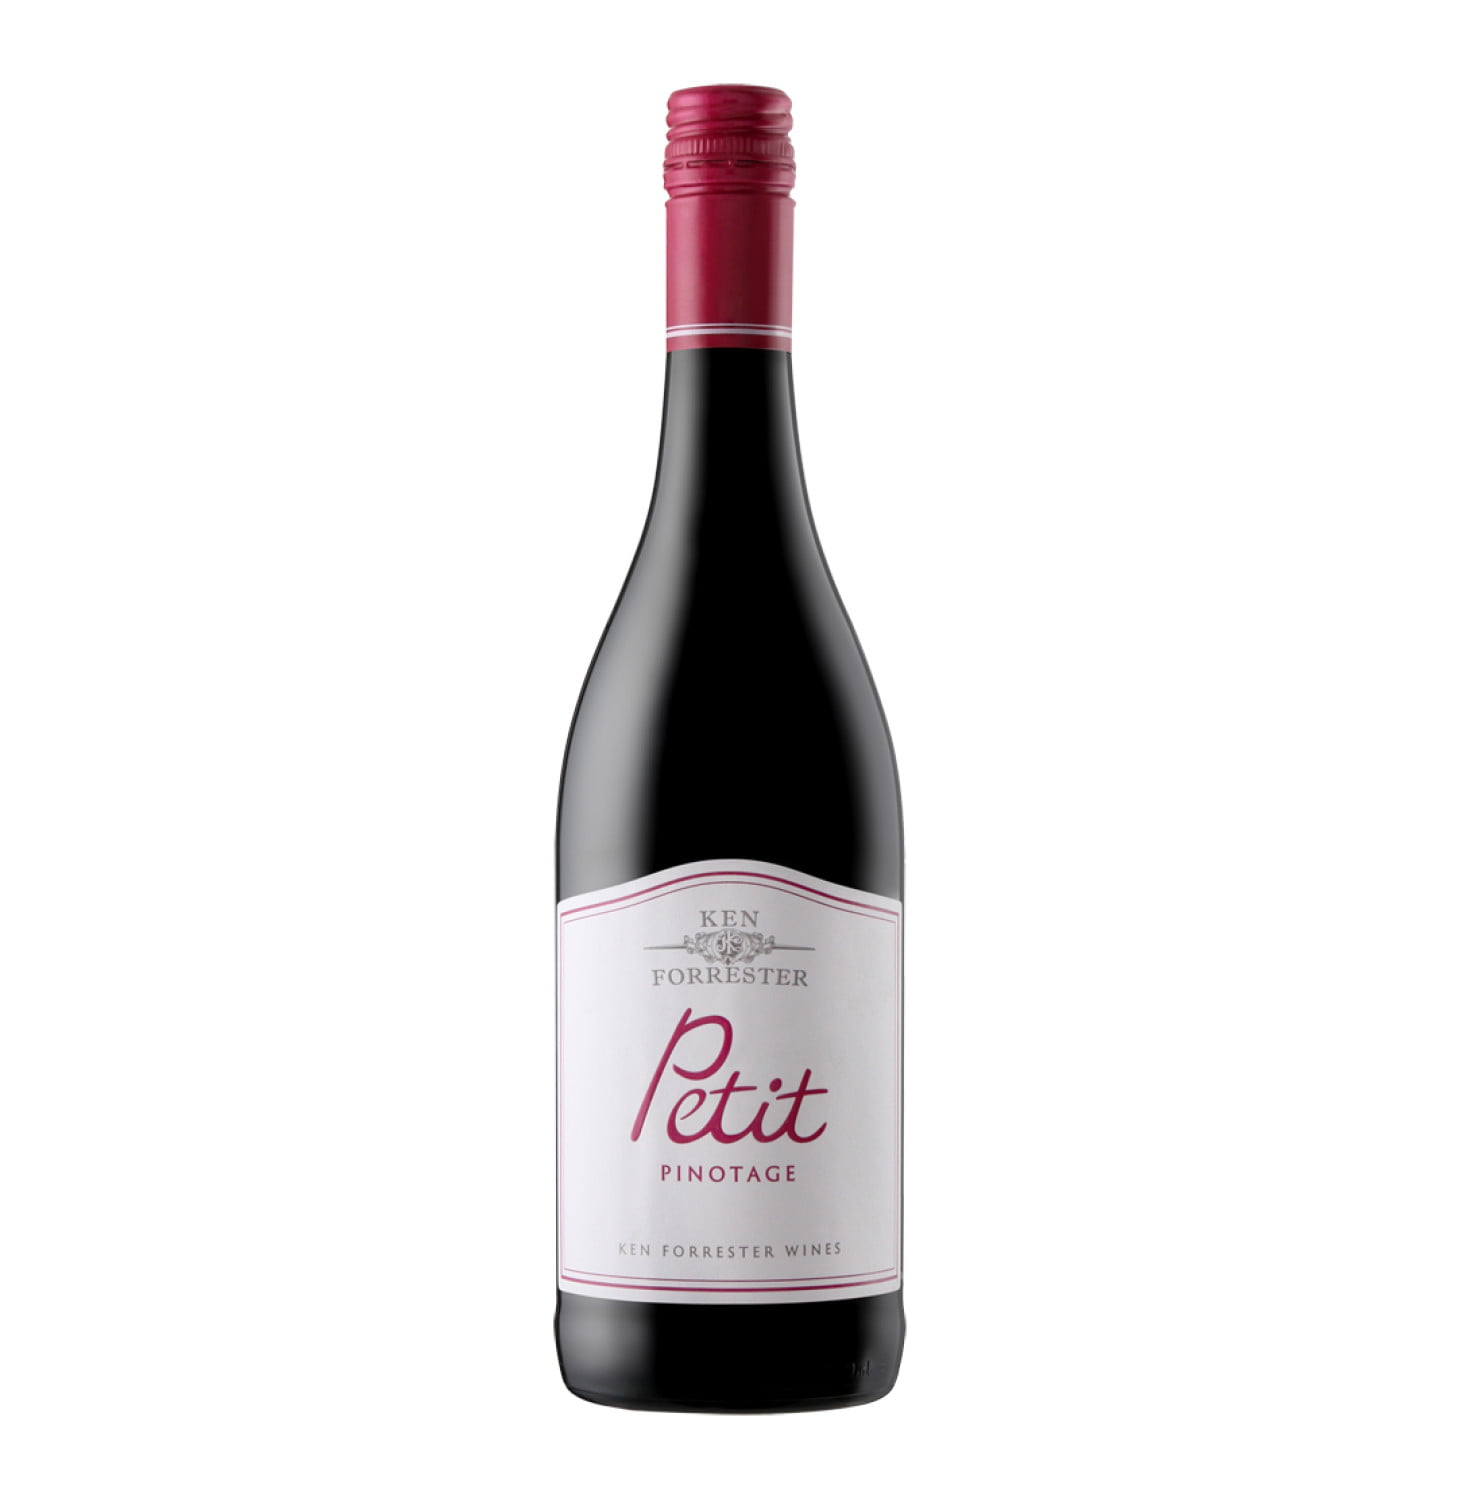 Ken Forrester Petit Pinotage - Grape Expectations